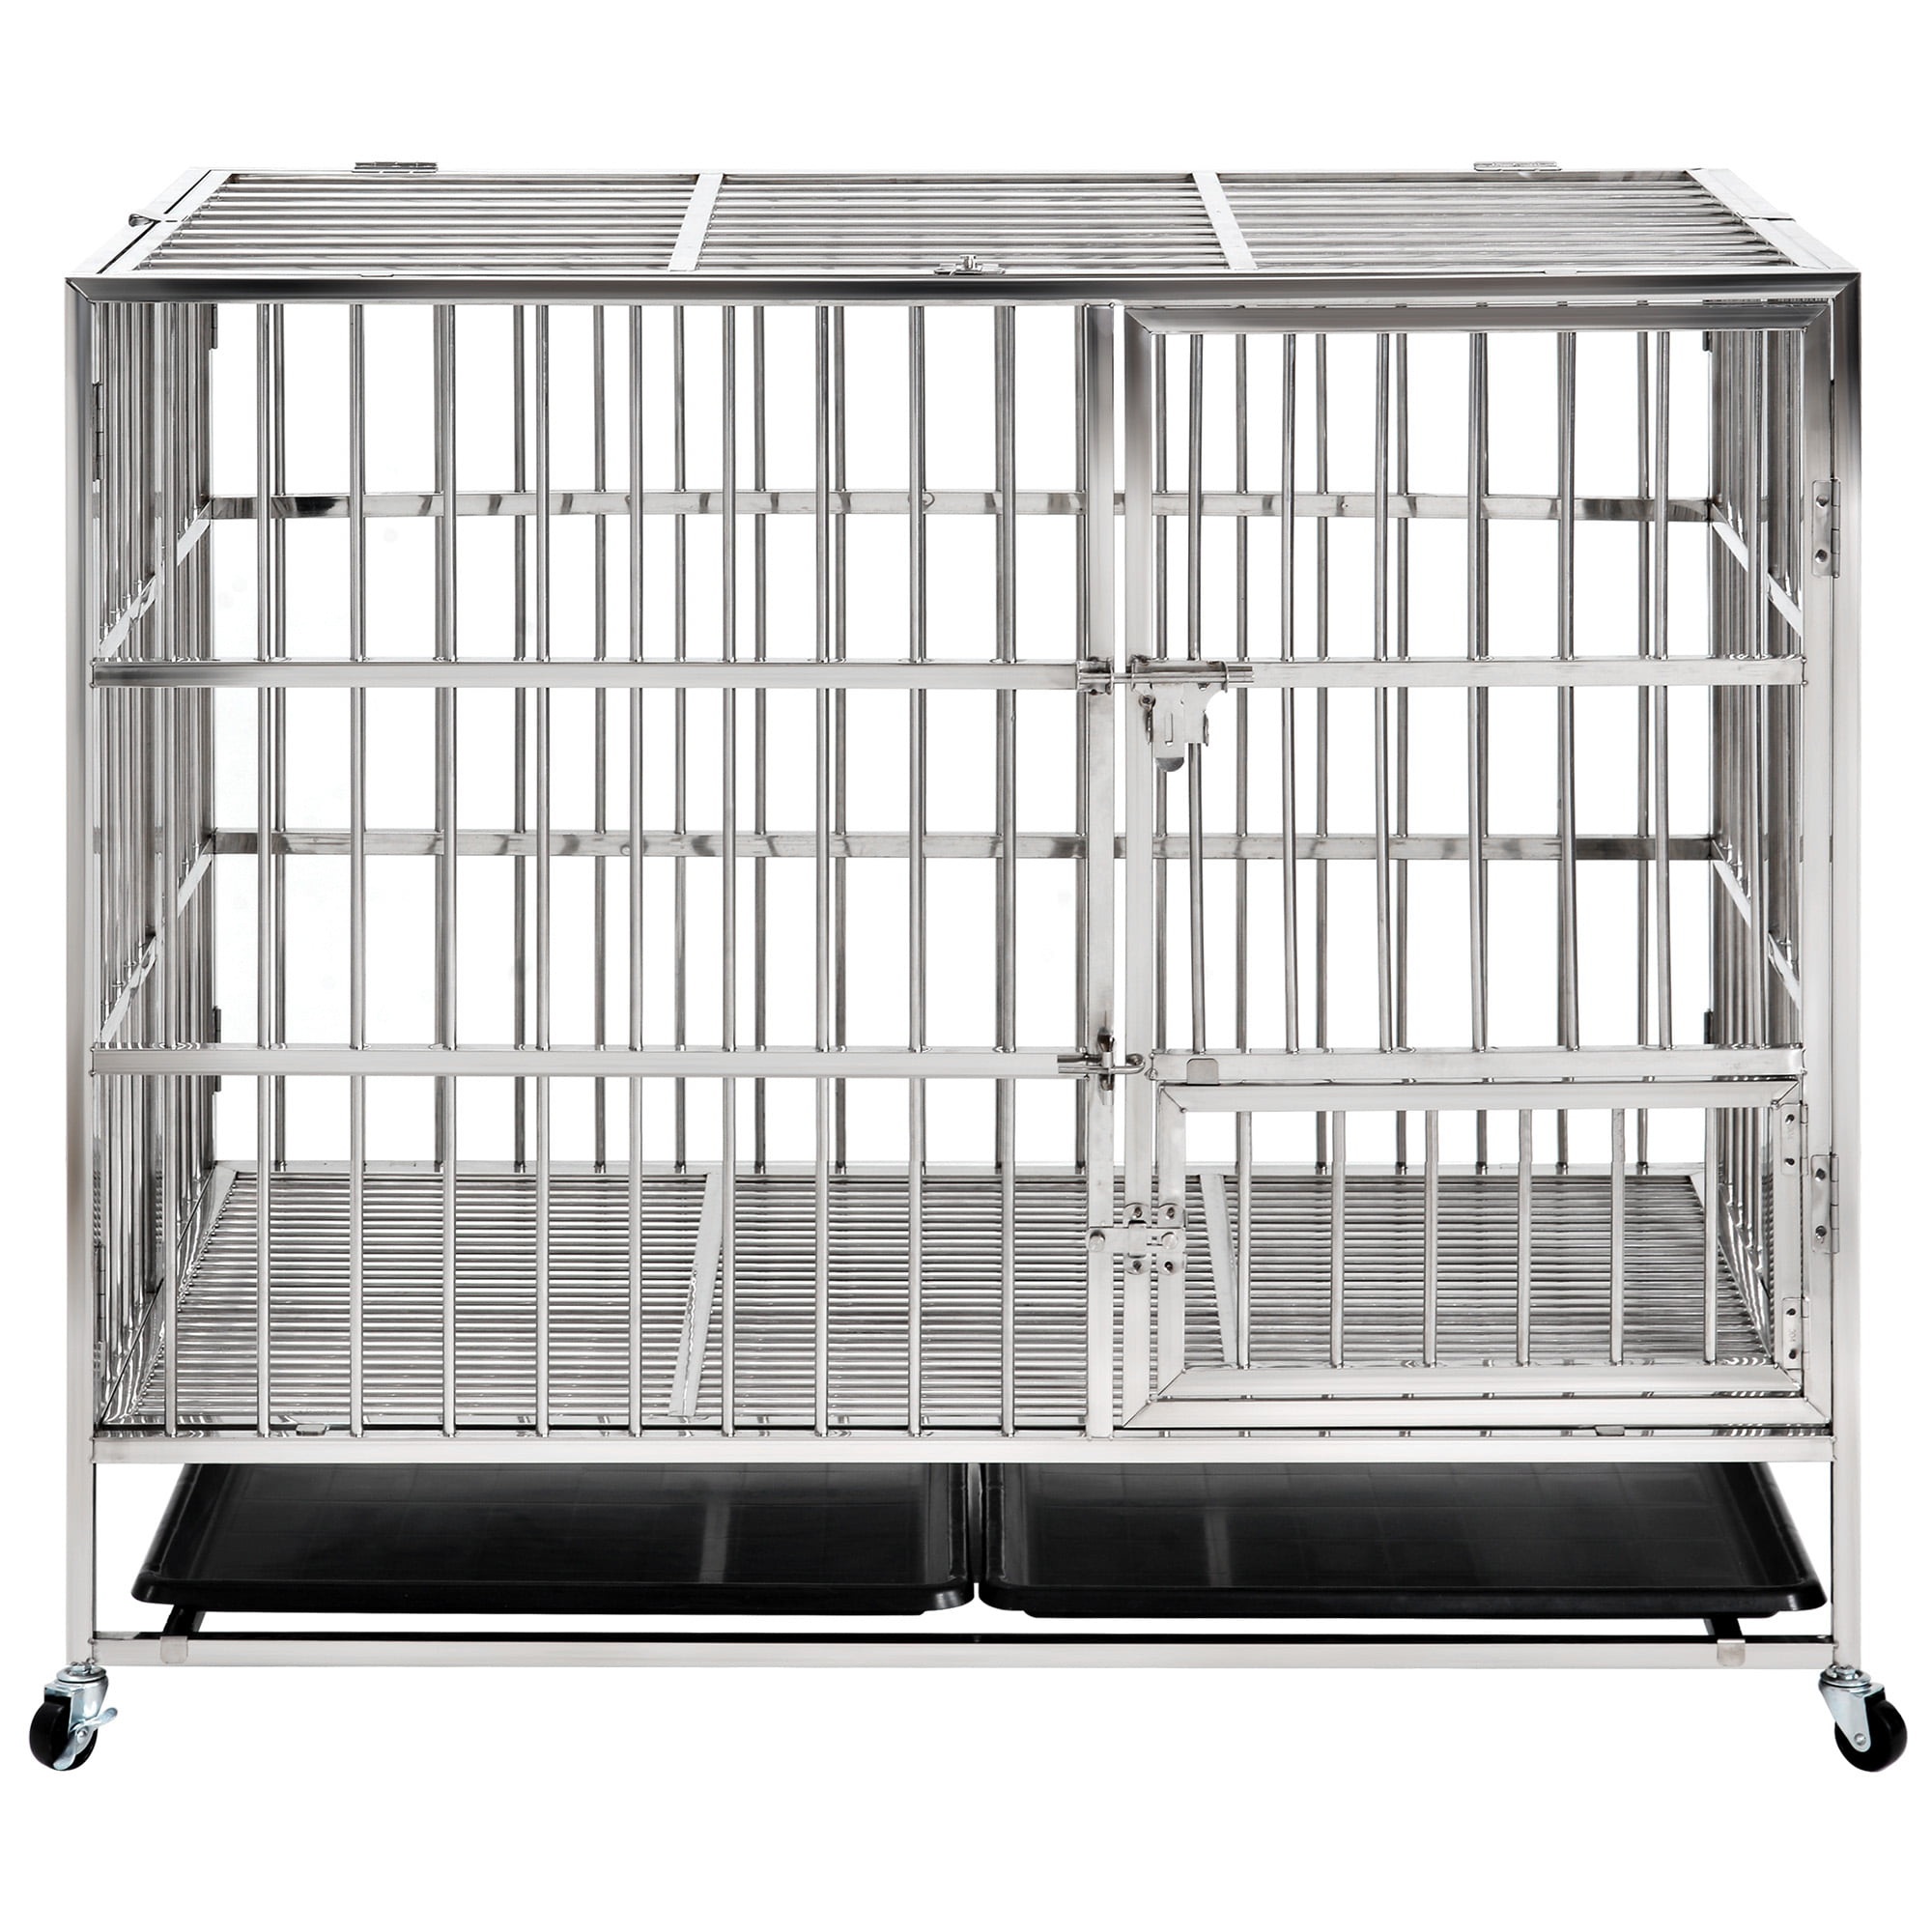 43'' Dog Kennels and Crates, Indoor Heavy-Duty Stainless Steel Dog Cage Heavy Duty Stainless Steel Dog Crate